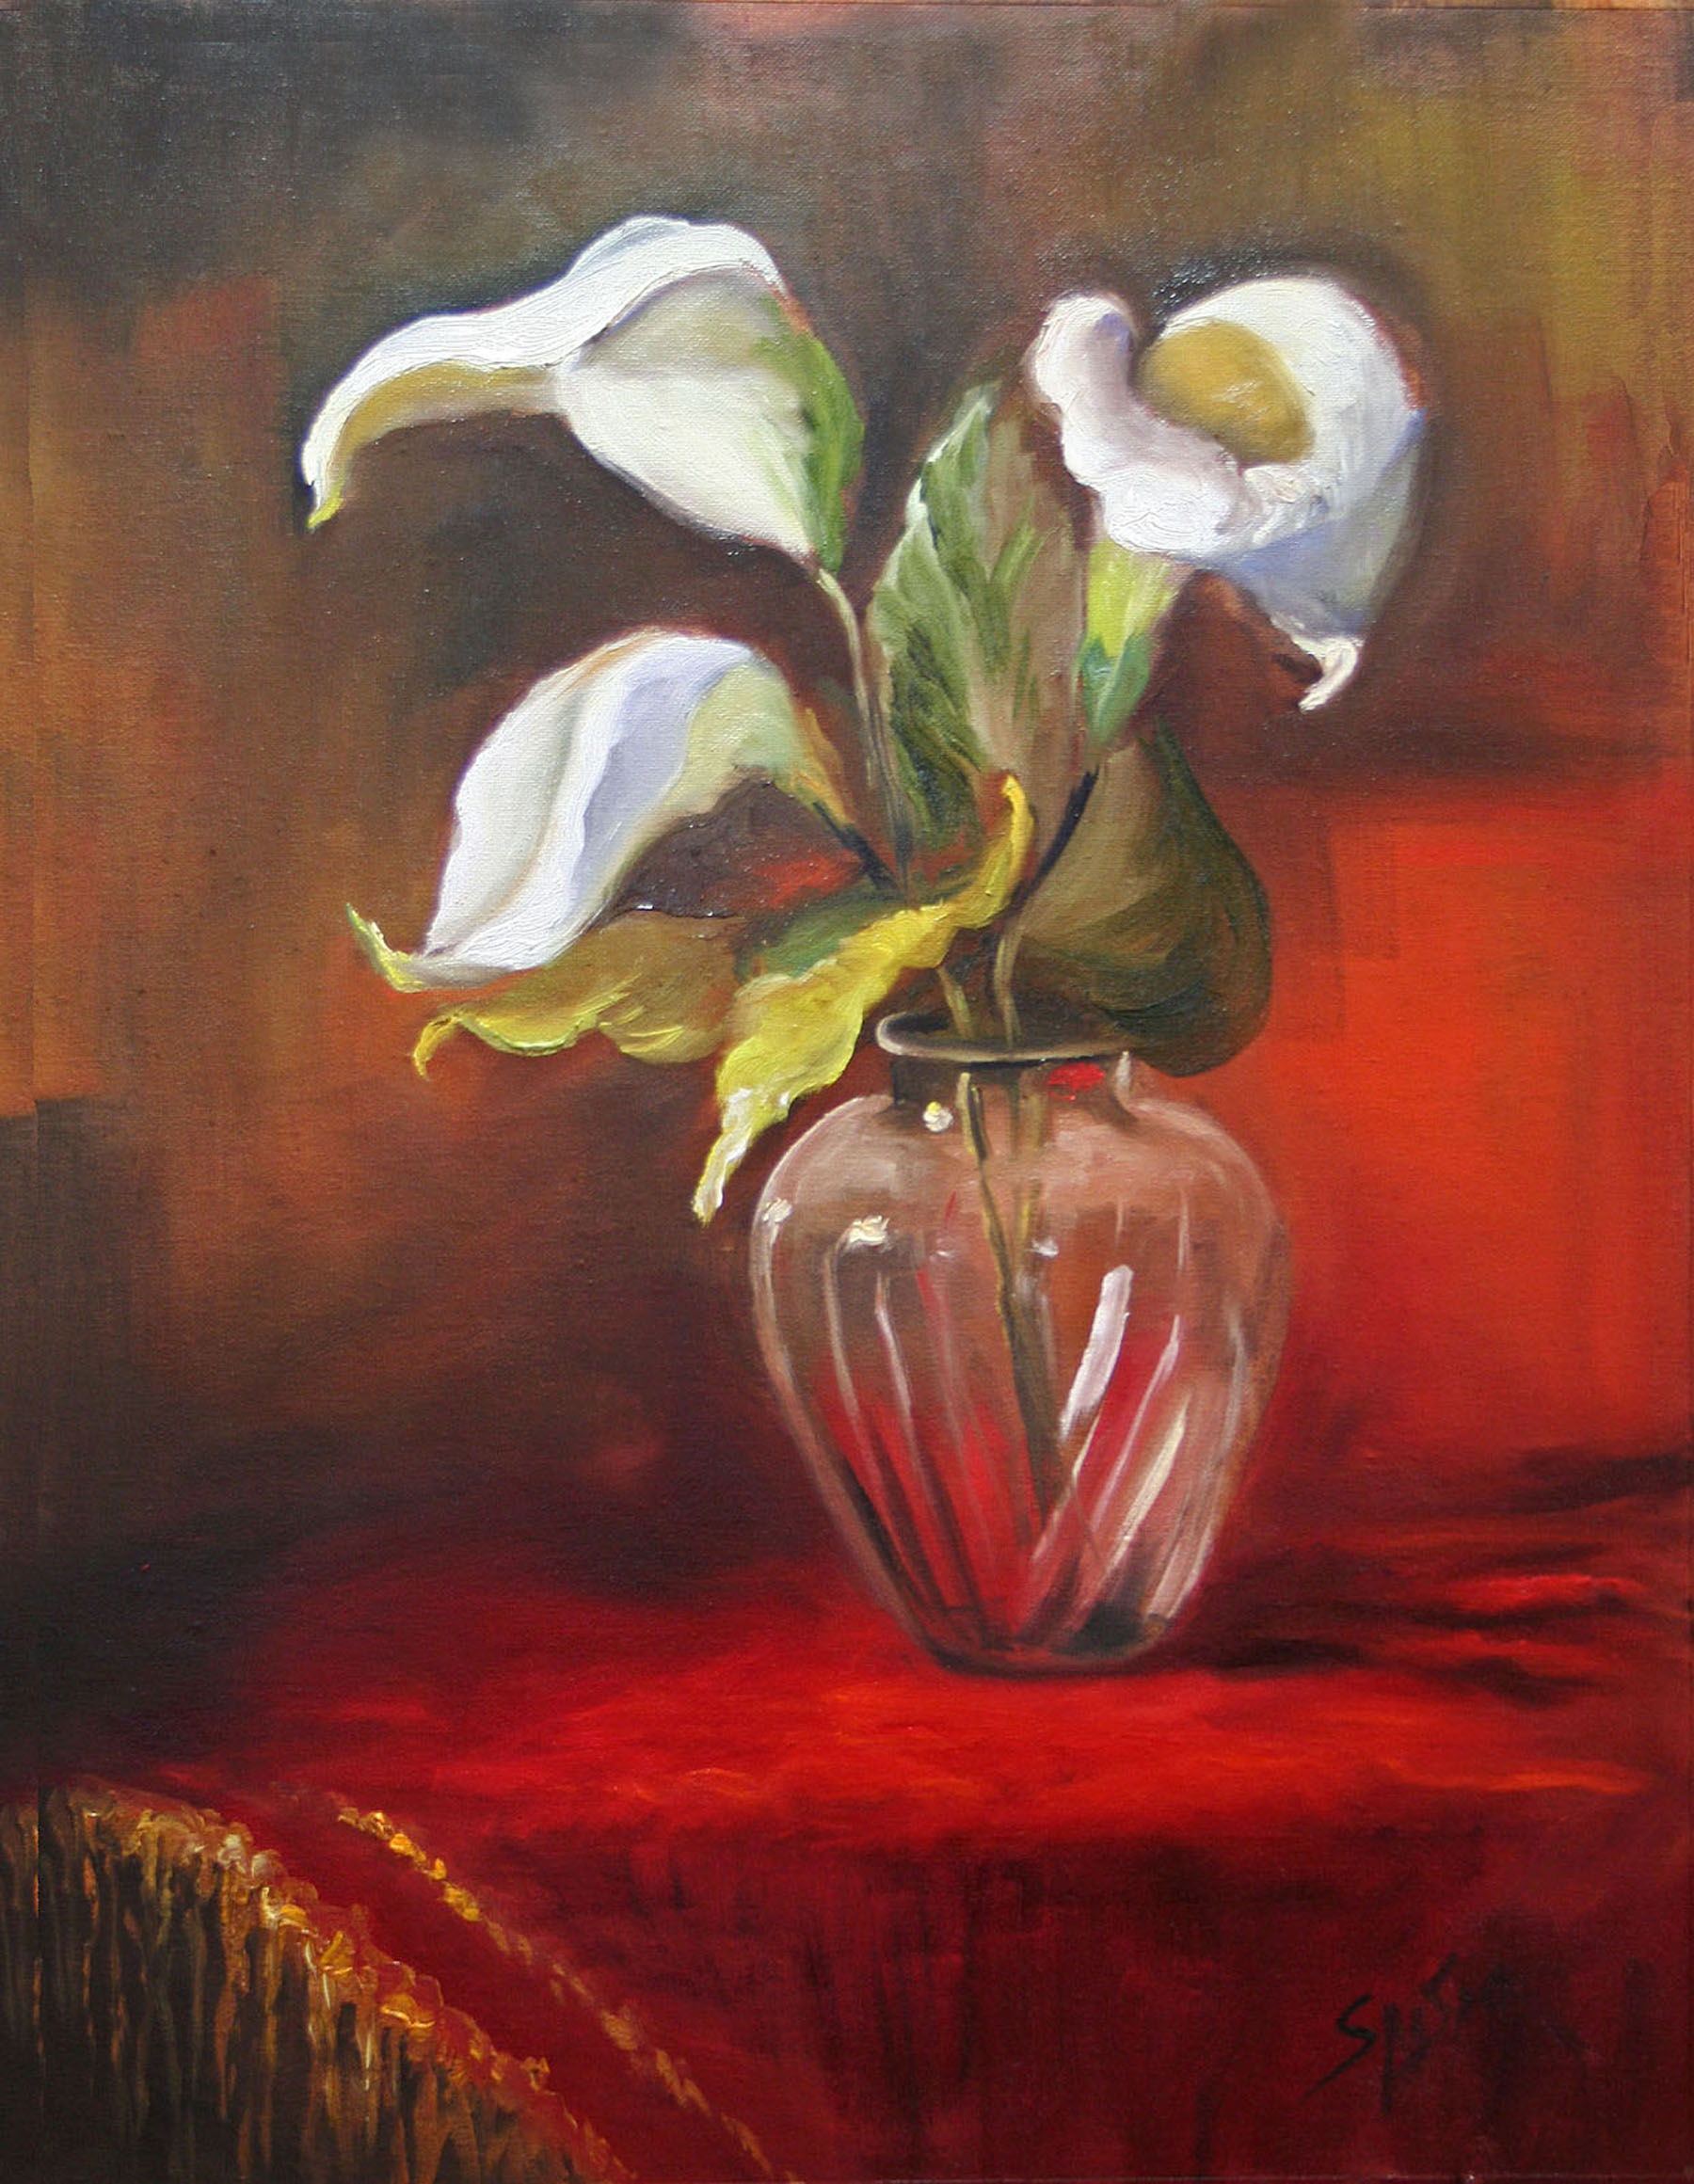 Lilly's in Cut Glass, 12" x 9", Oil on Panel